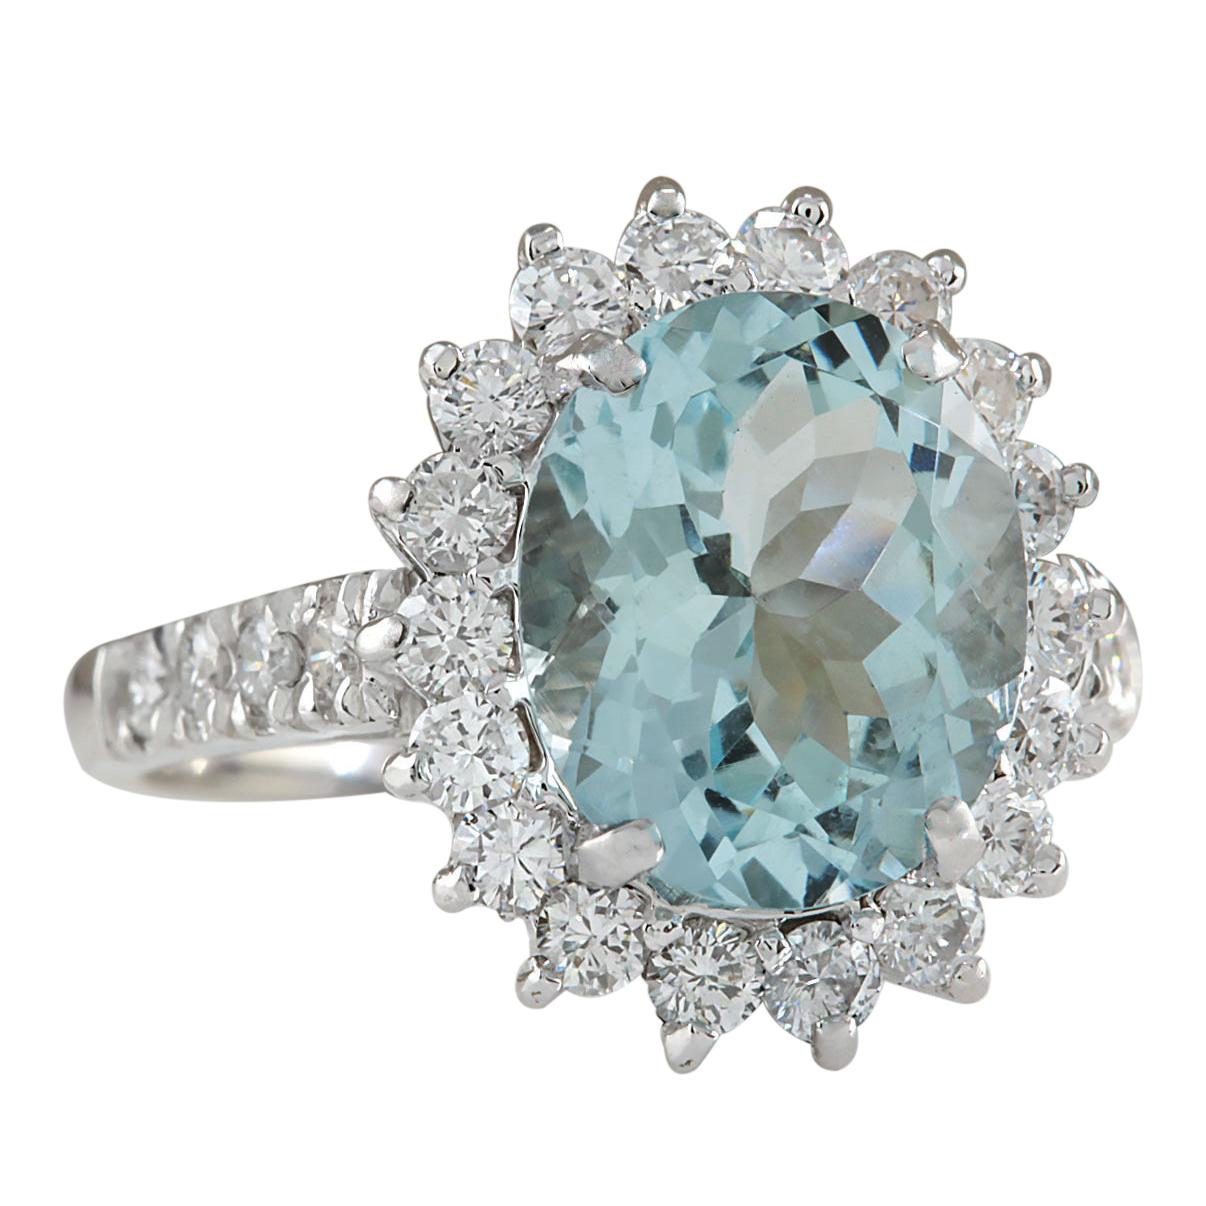 Stamped: 14K White Gold
Total Ring Weight: 5.0 Grams
Total Natural Aquamarine Weight is 3.21 Carat (Measures: 11.00x9.00 mm)
Color: Blue
Total Natural Diamond Weight is 1.25 Carat
Color: F-G, Clarity: VS2-SI1
Face Measures: 16.00x14.00 mm
Sku: